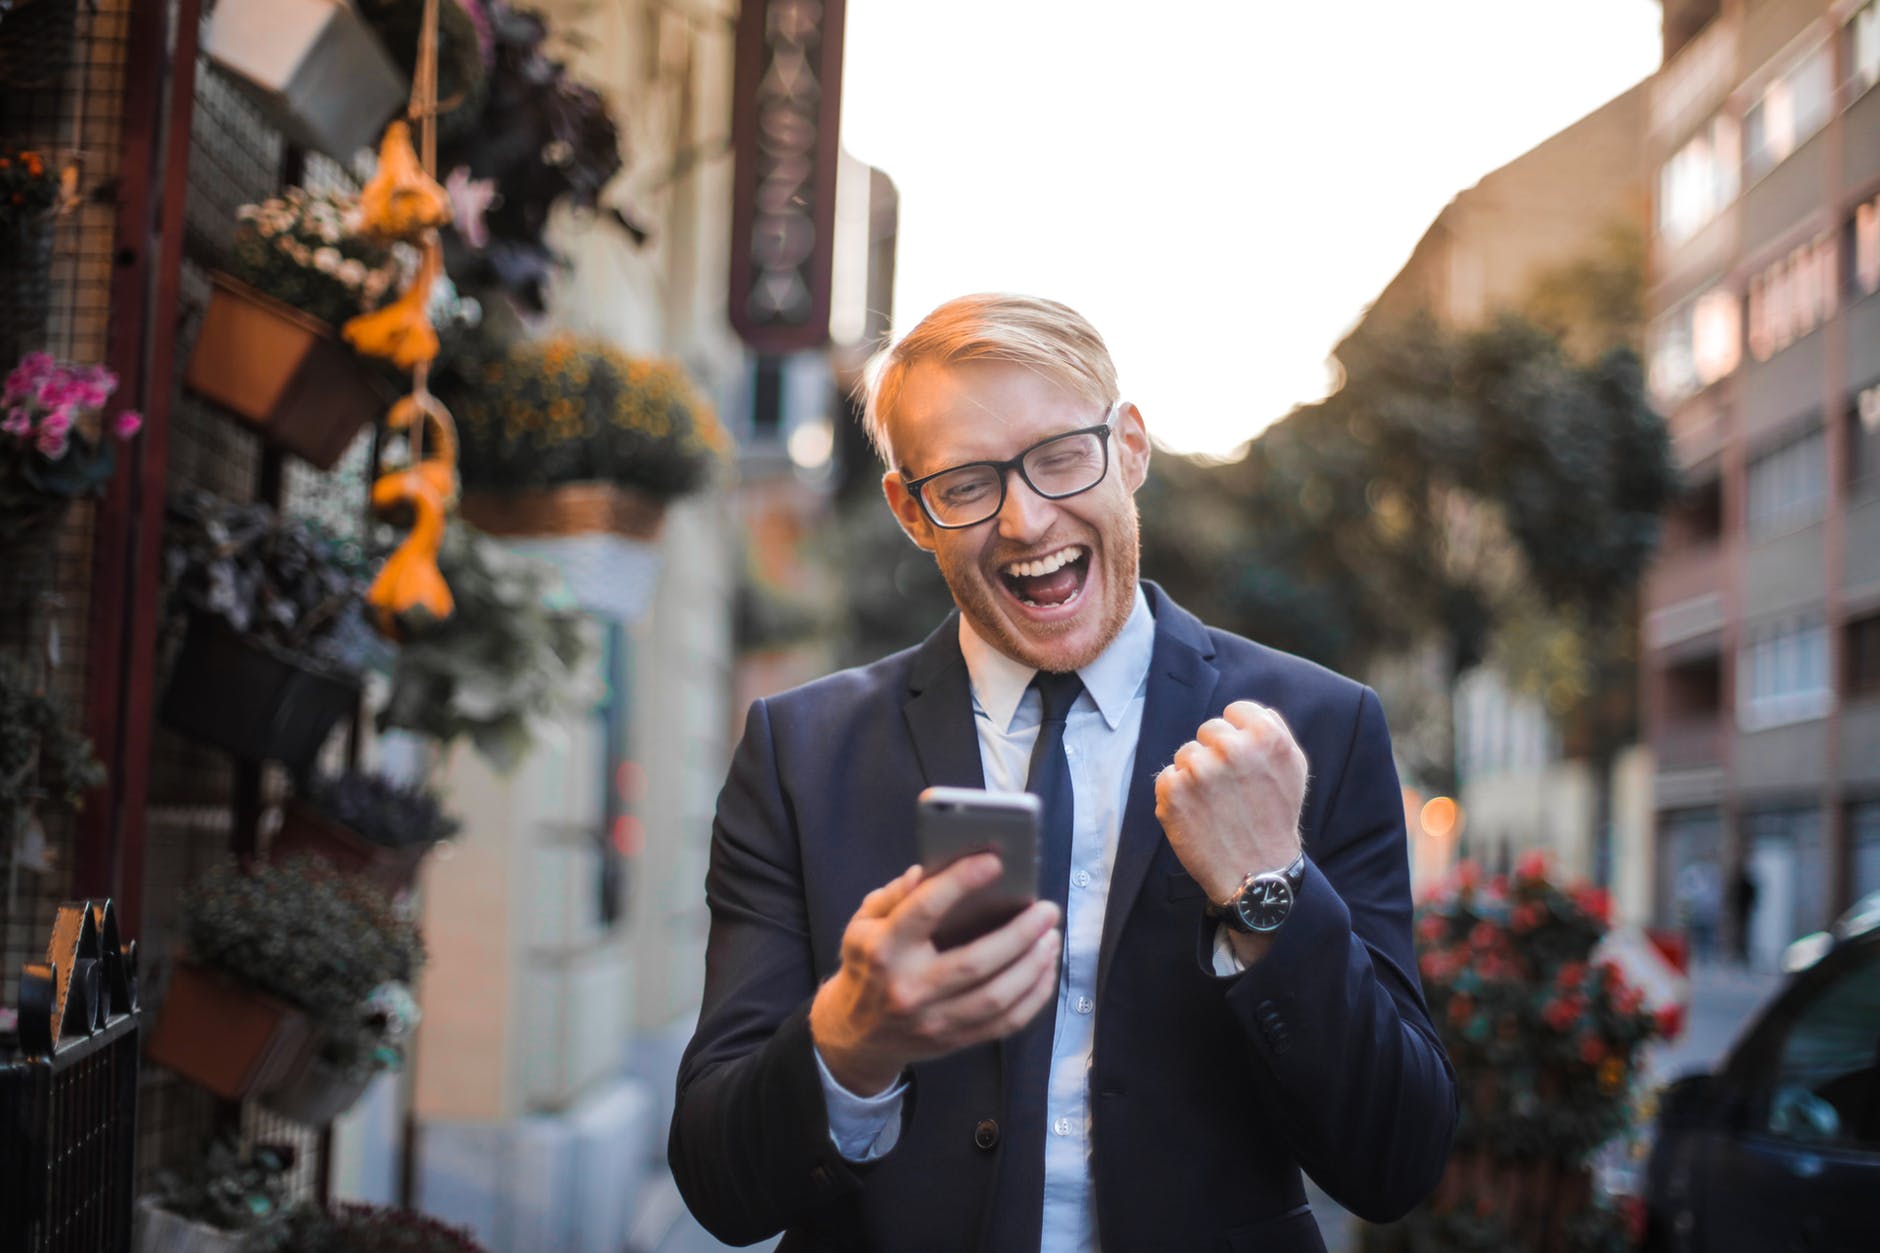 An excited man holds a phone in his hand